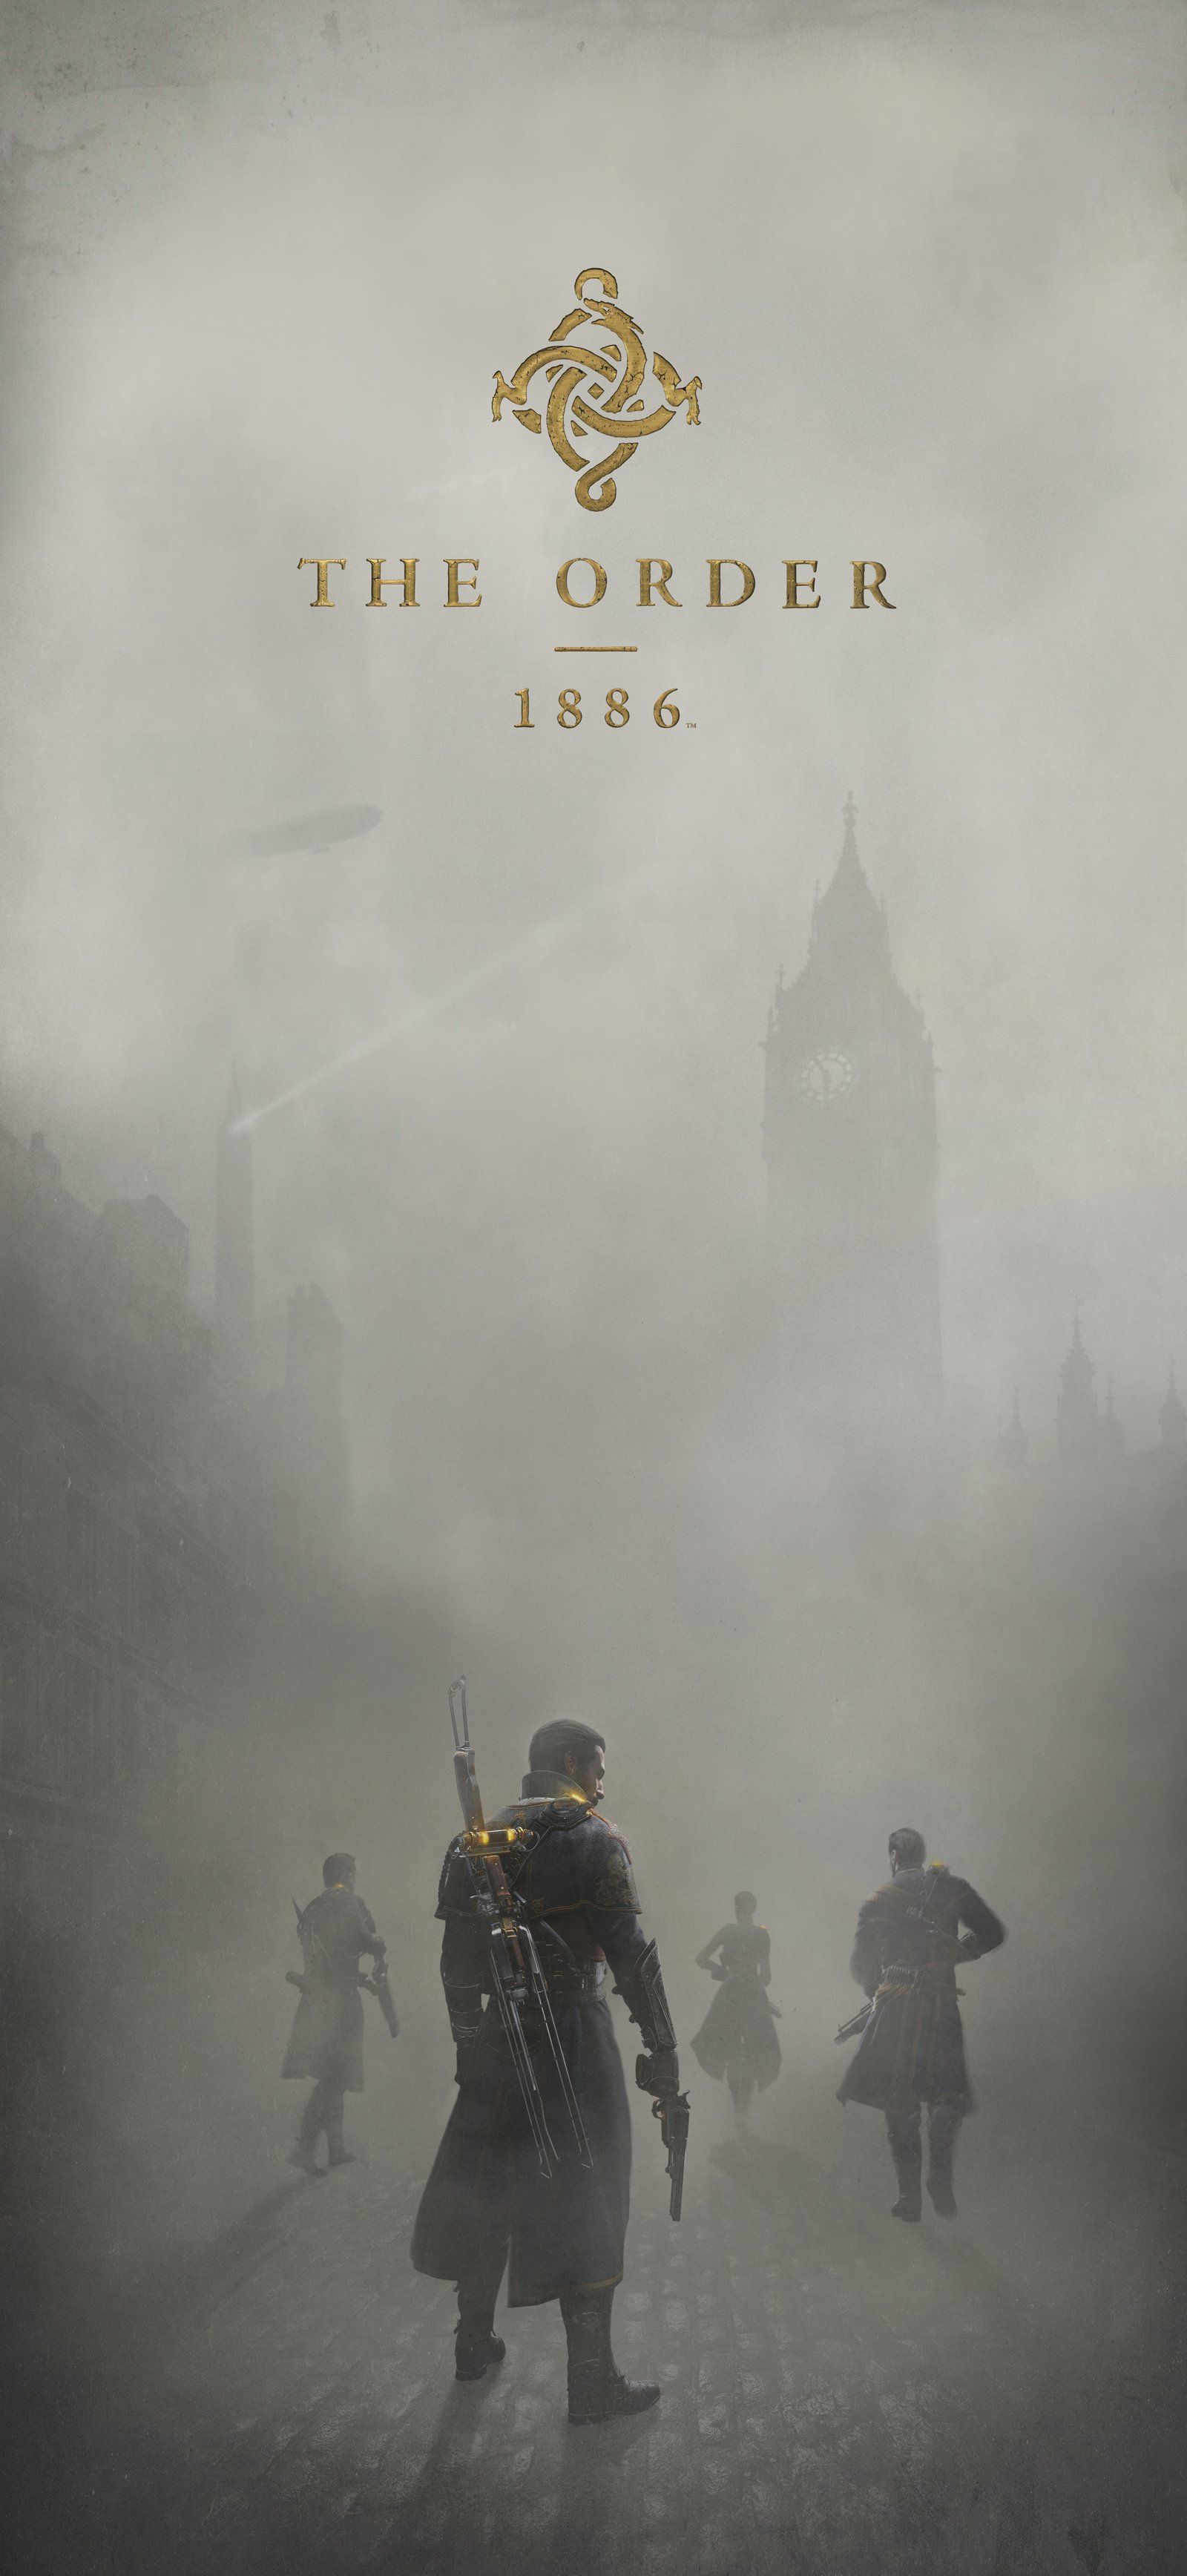 The Order: 1886 Wallpapers